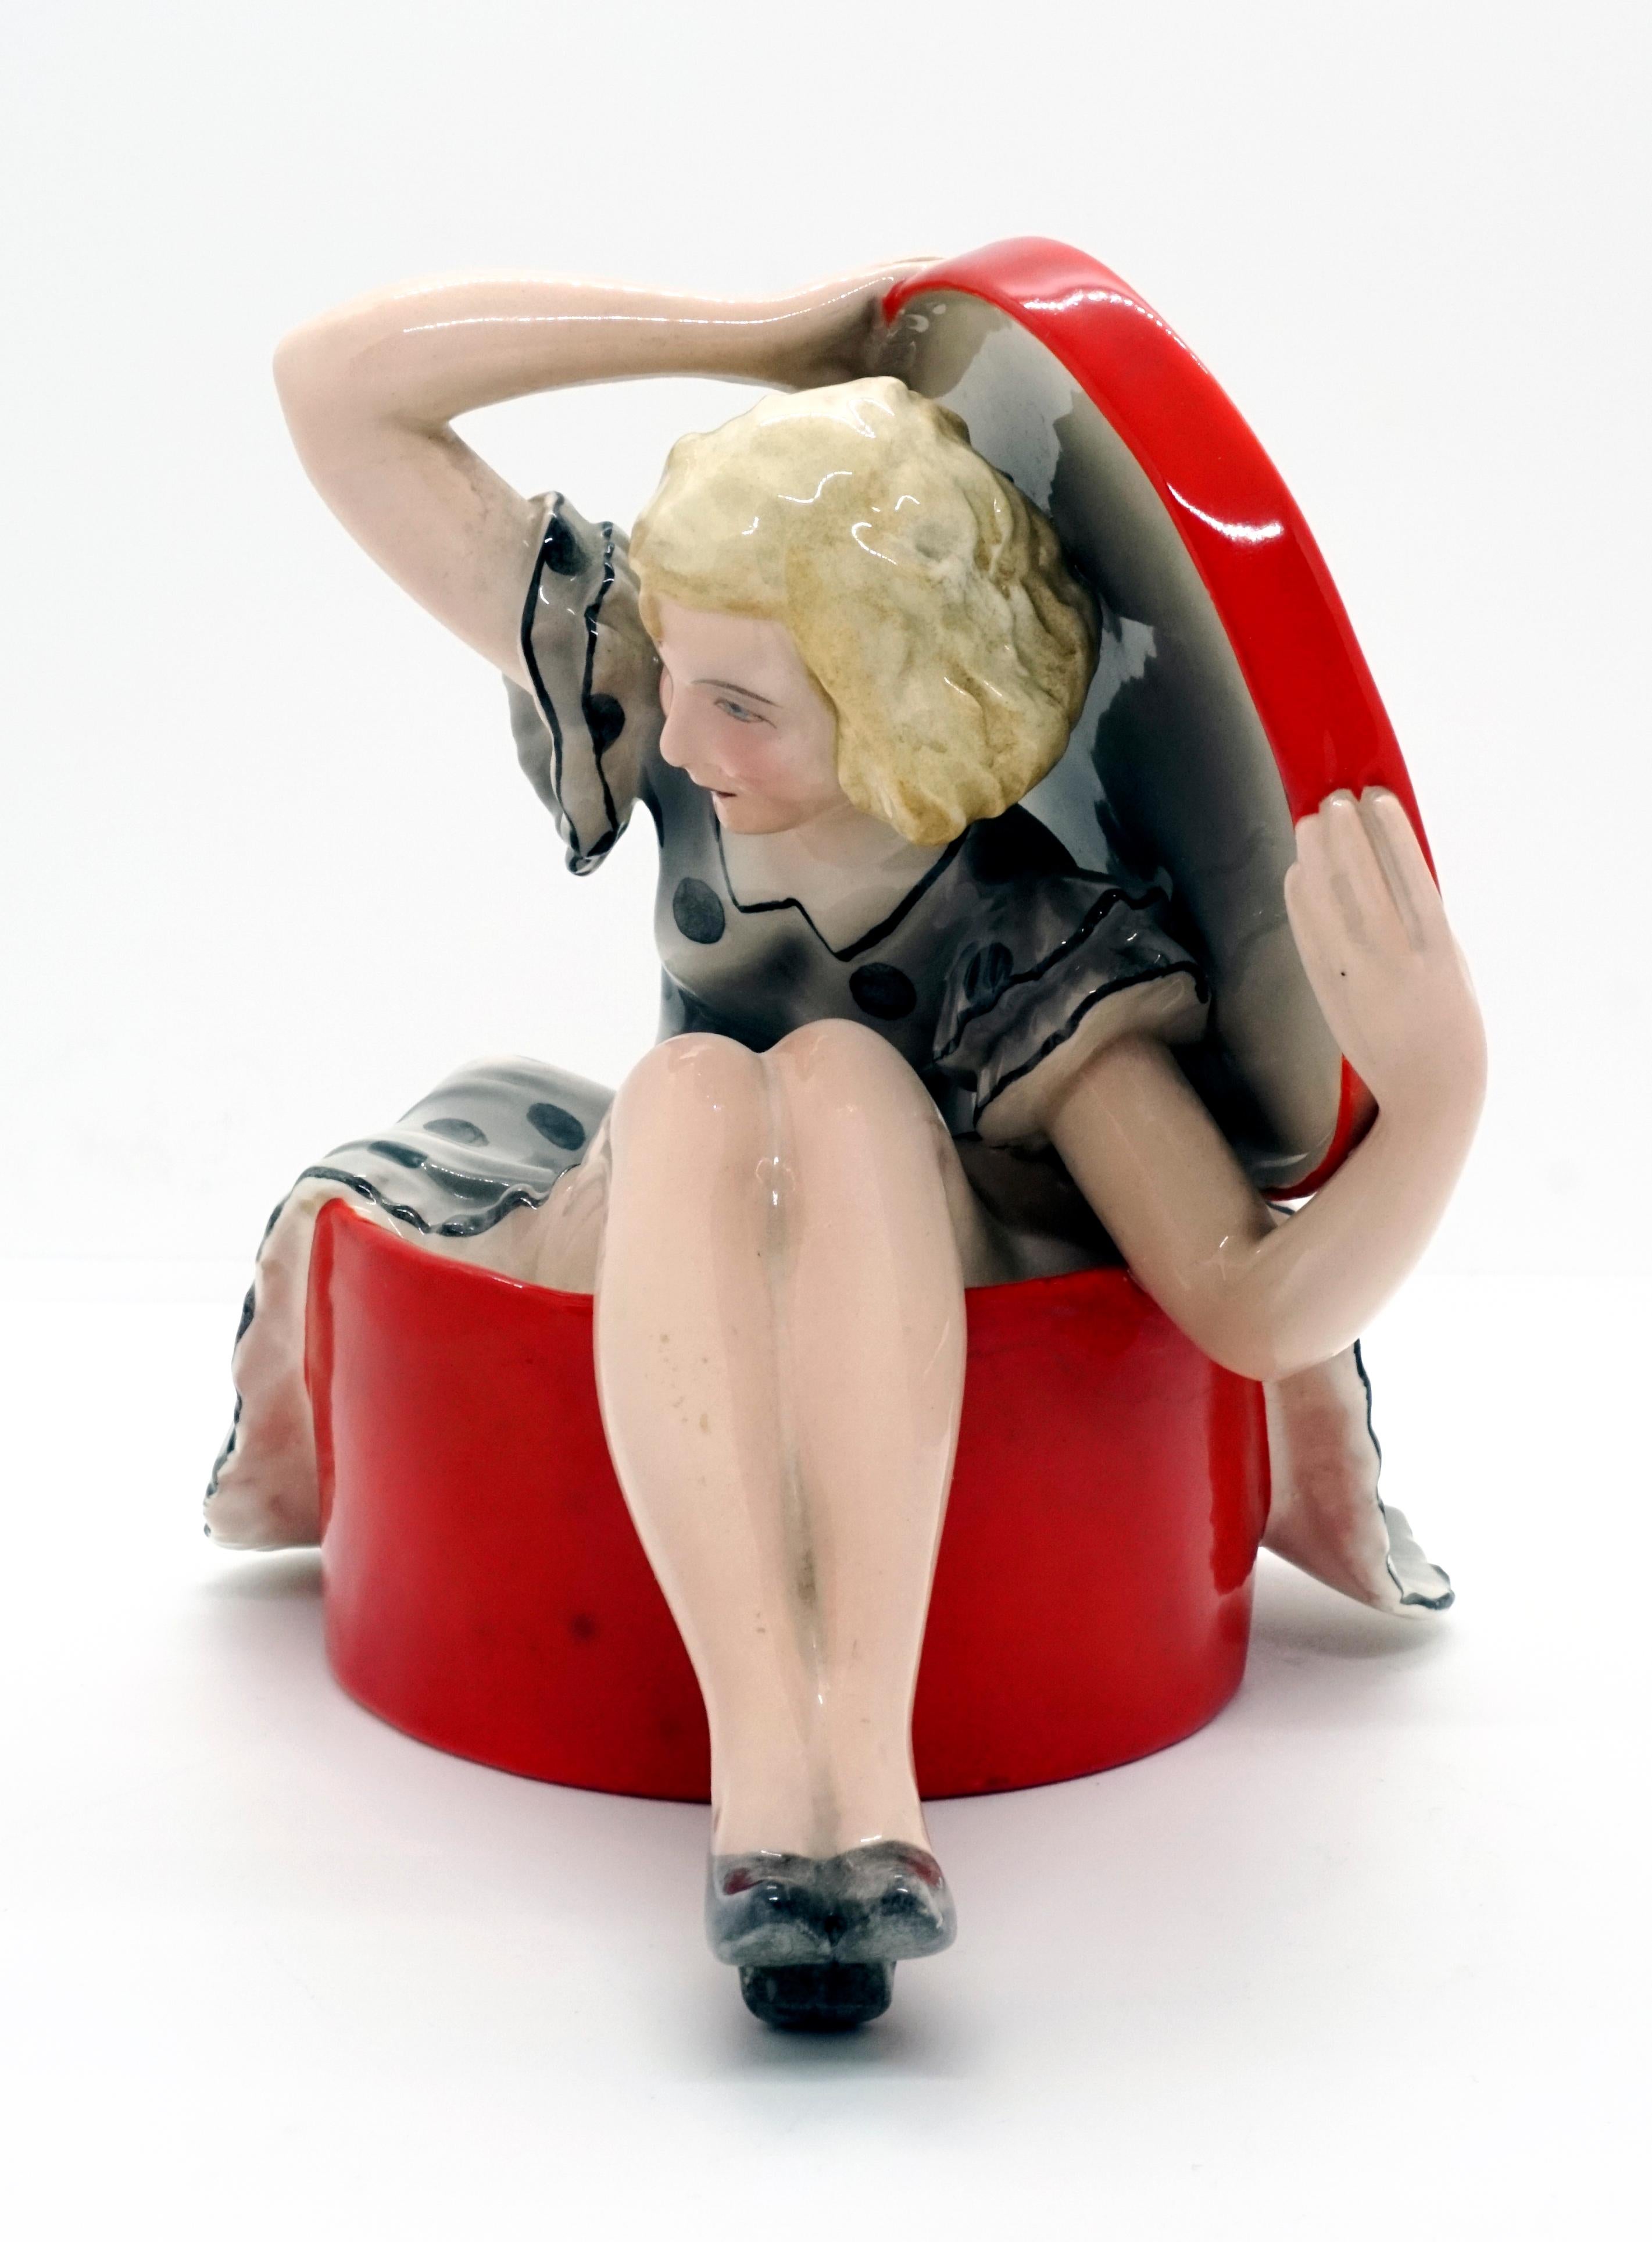 Very rare Goldscheider Art Deco ceramic figurine.
A young lady with blond curly hair and a light gray, spotted summer dress is sitting in a large, red hat box, leaning slightly forward, holding the lid up behind her with both hands.

Designed by